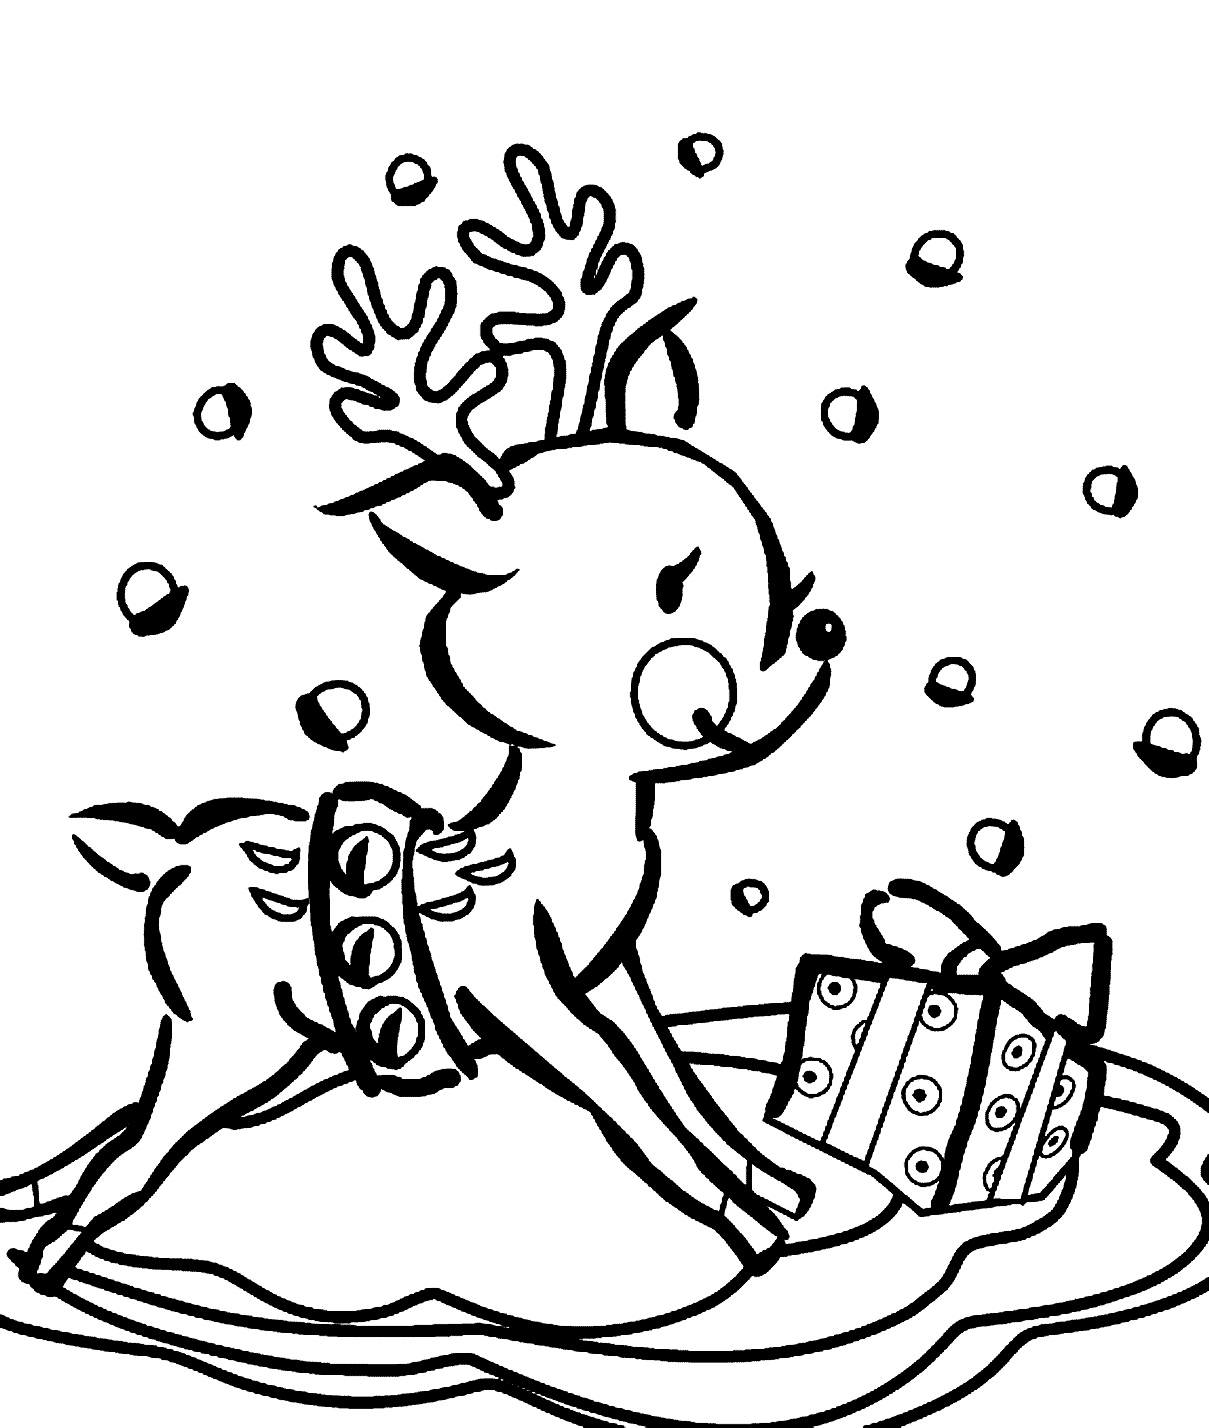 Coloring Pages For Christmas Reindeer at GetColorings.com | Free ...